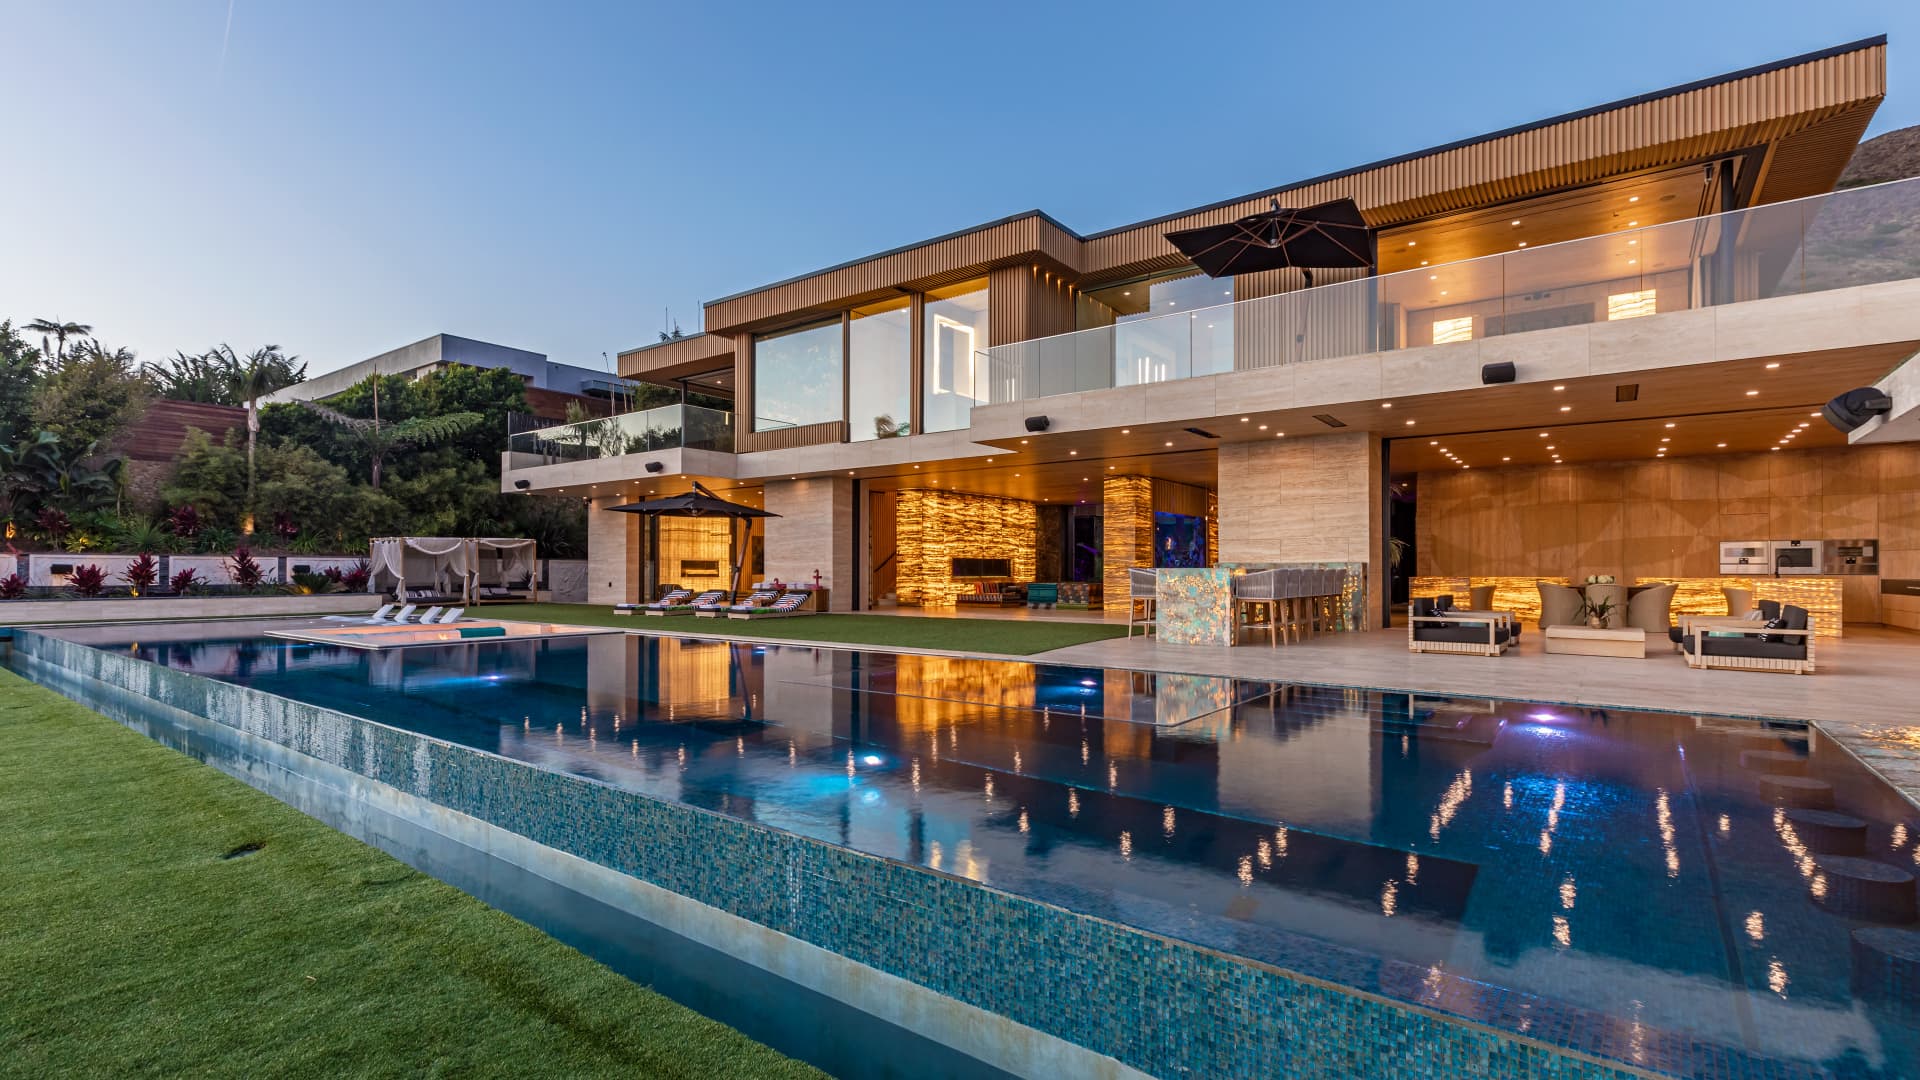 Glass walls on the home's lower level open to the sun deck and swimming pool.